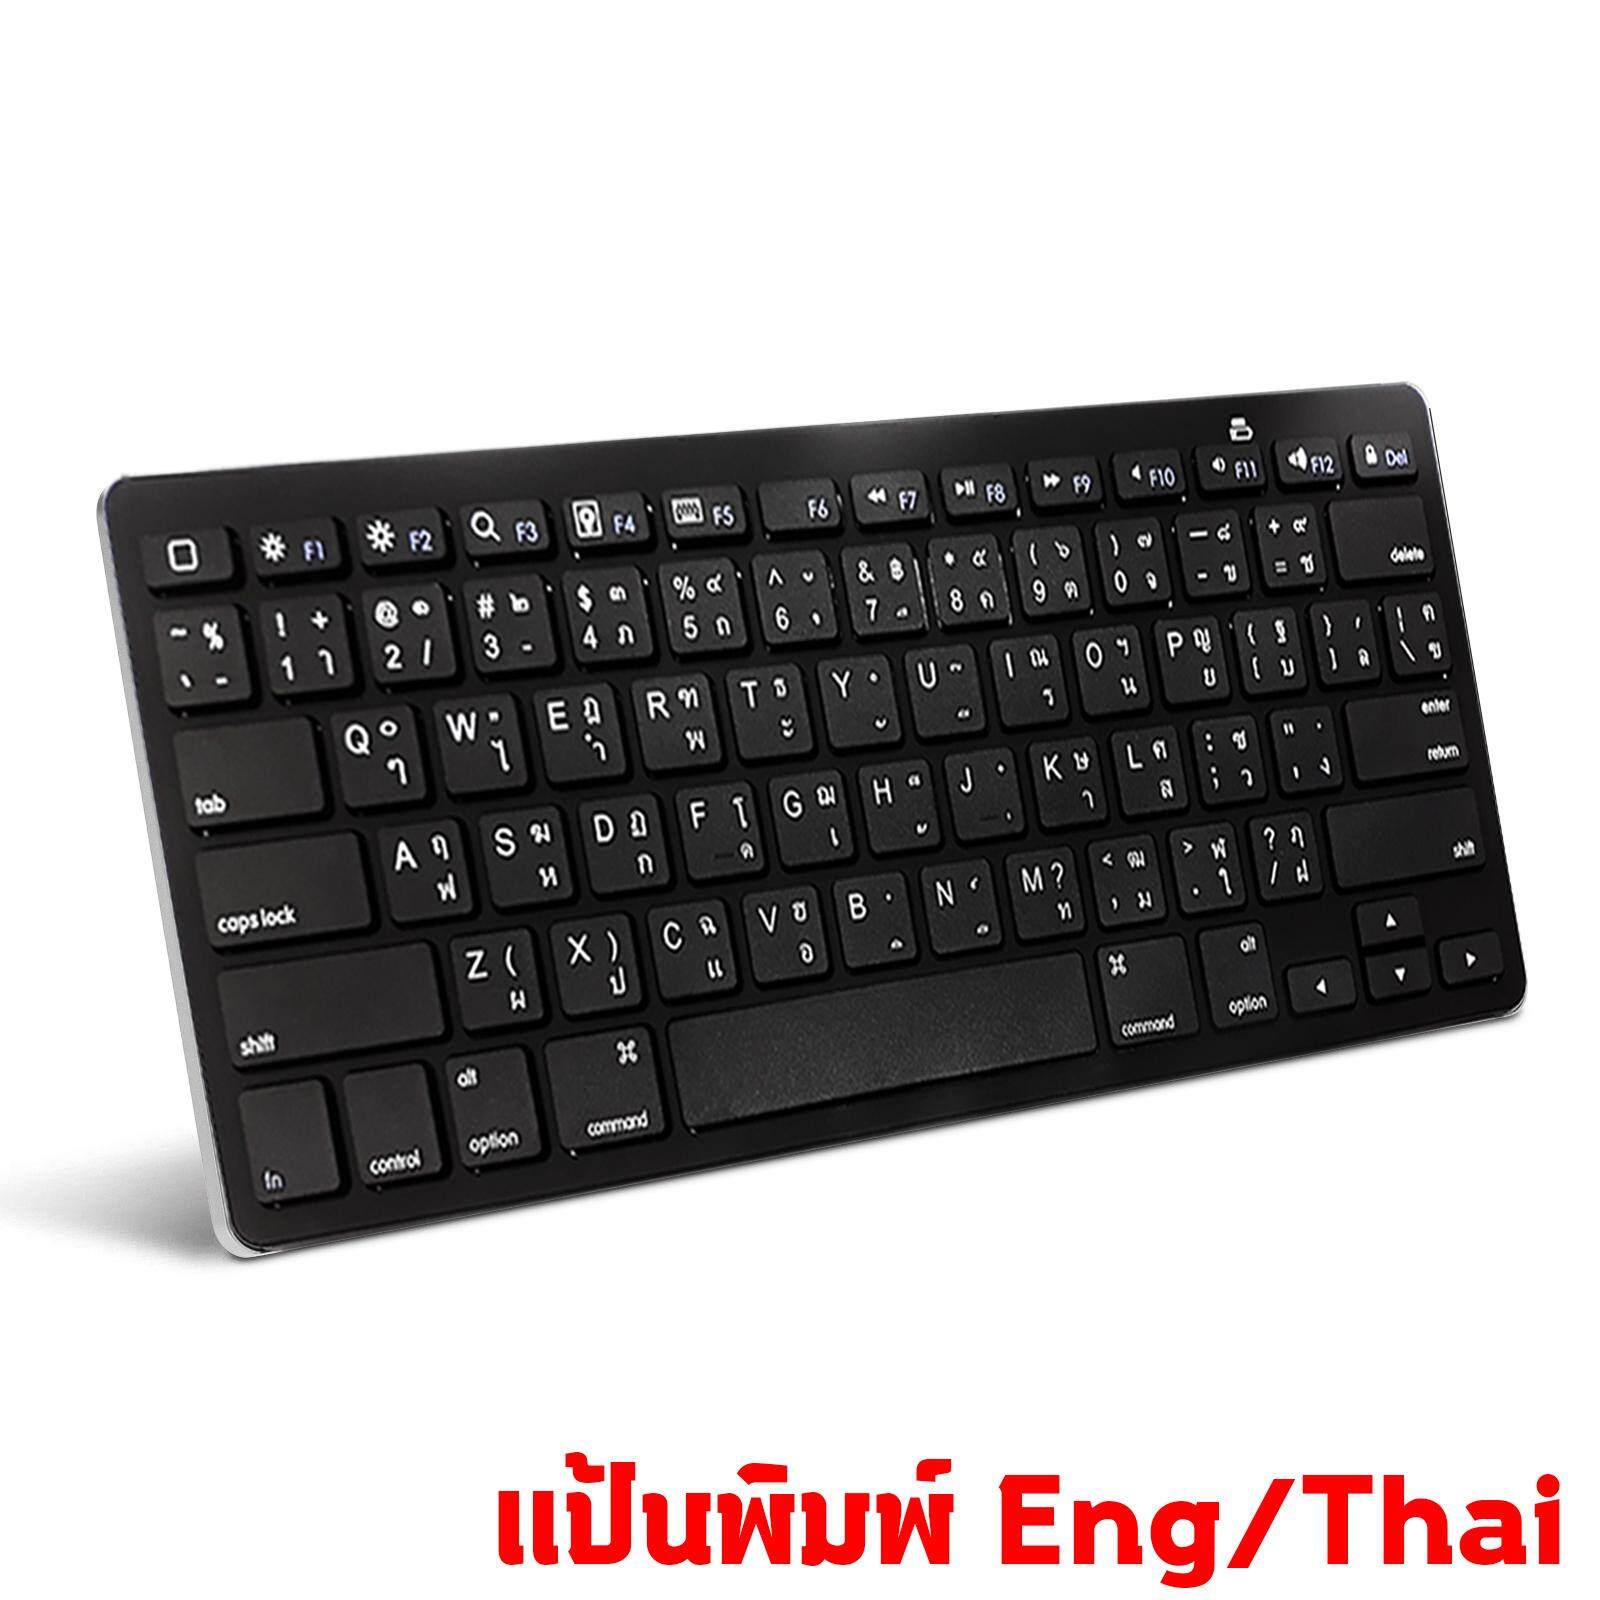 [Bluetooth Office Keyboard] คีย์บอร์ดไร้สายบลูทูธ KEYBOARD Wireless 3.0 Bluetooth Fast Connection EN/TH English and Thai Layout BK-3001 iOS Android PC Mobile Phone Tablet Smart TV